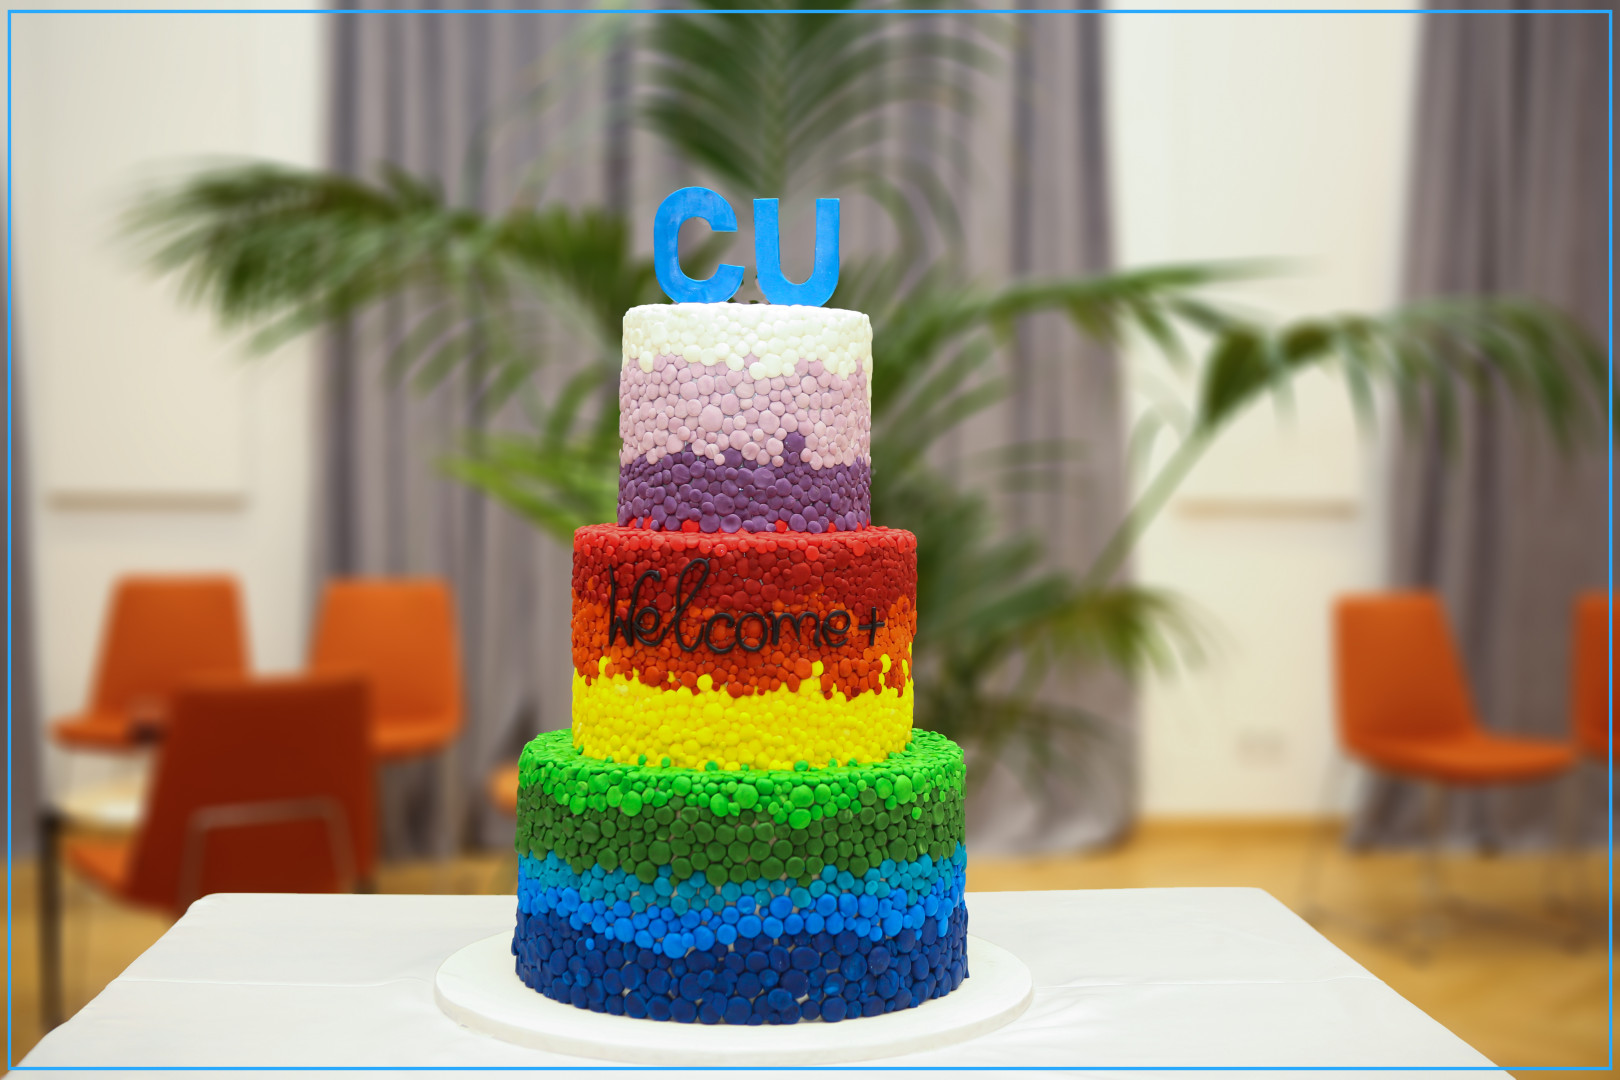 CU Welcome party +